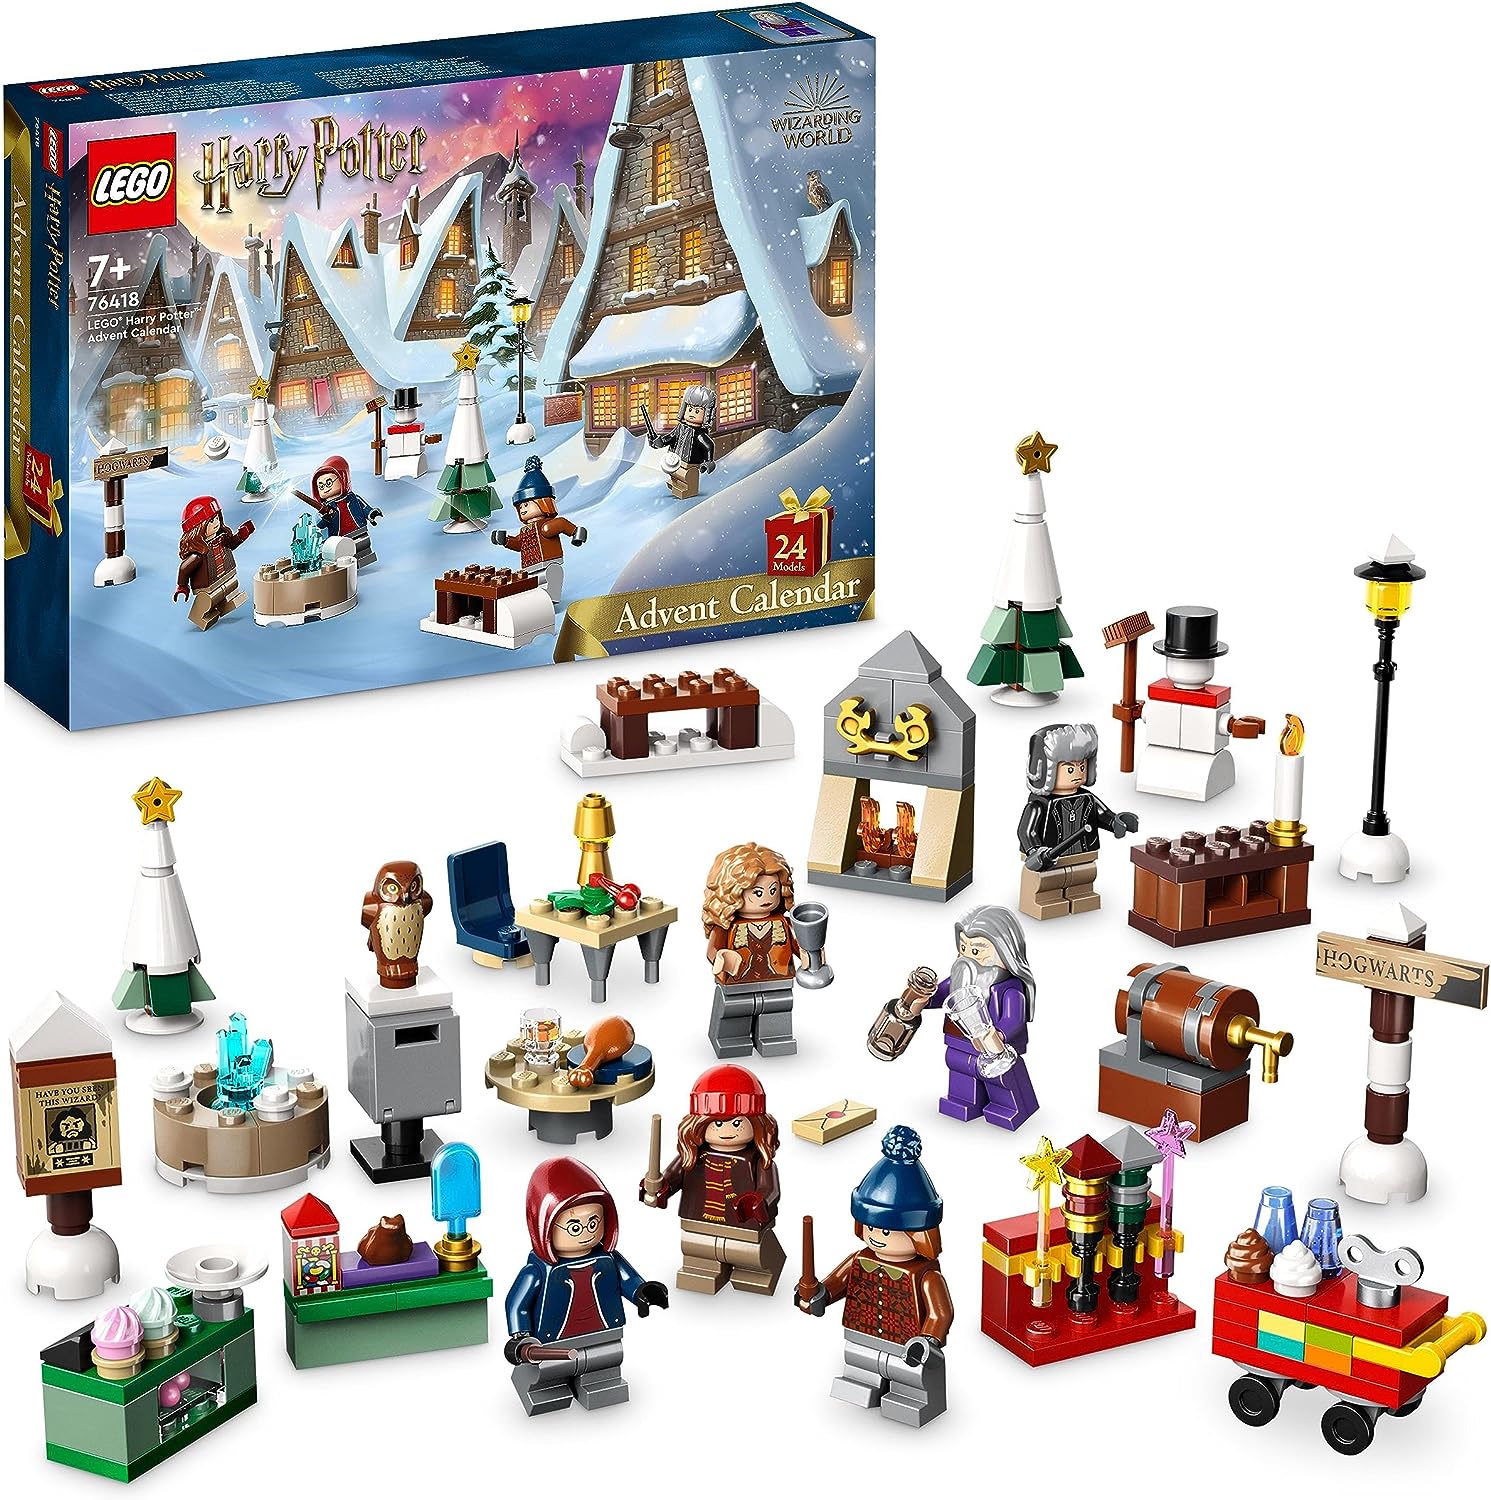 LEGO 76418 Harry Potter Advent Calendar 2023, Christmas Calendar with 24 Gifts Including 18 Hogsmeade Mini Models and 6 Mini Figures such as Hermione Granger and Draco Malfoy, Christmas Toy